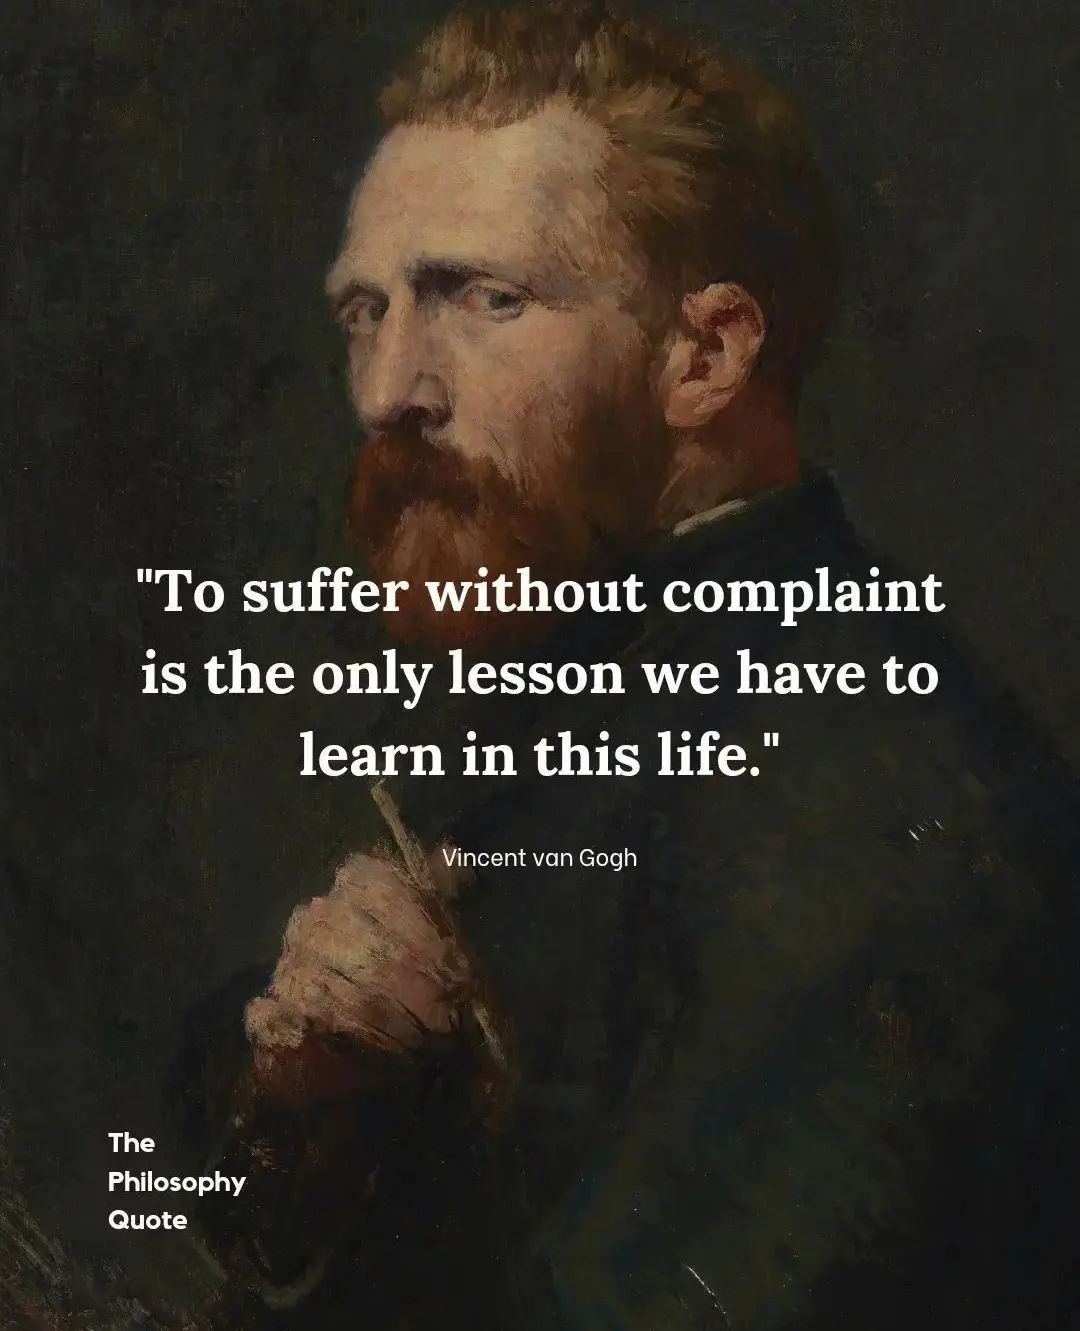 To suffer without complaint is the only lesson we have to learn in this life.